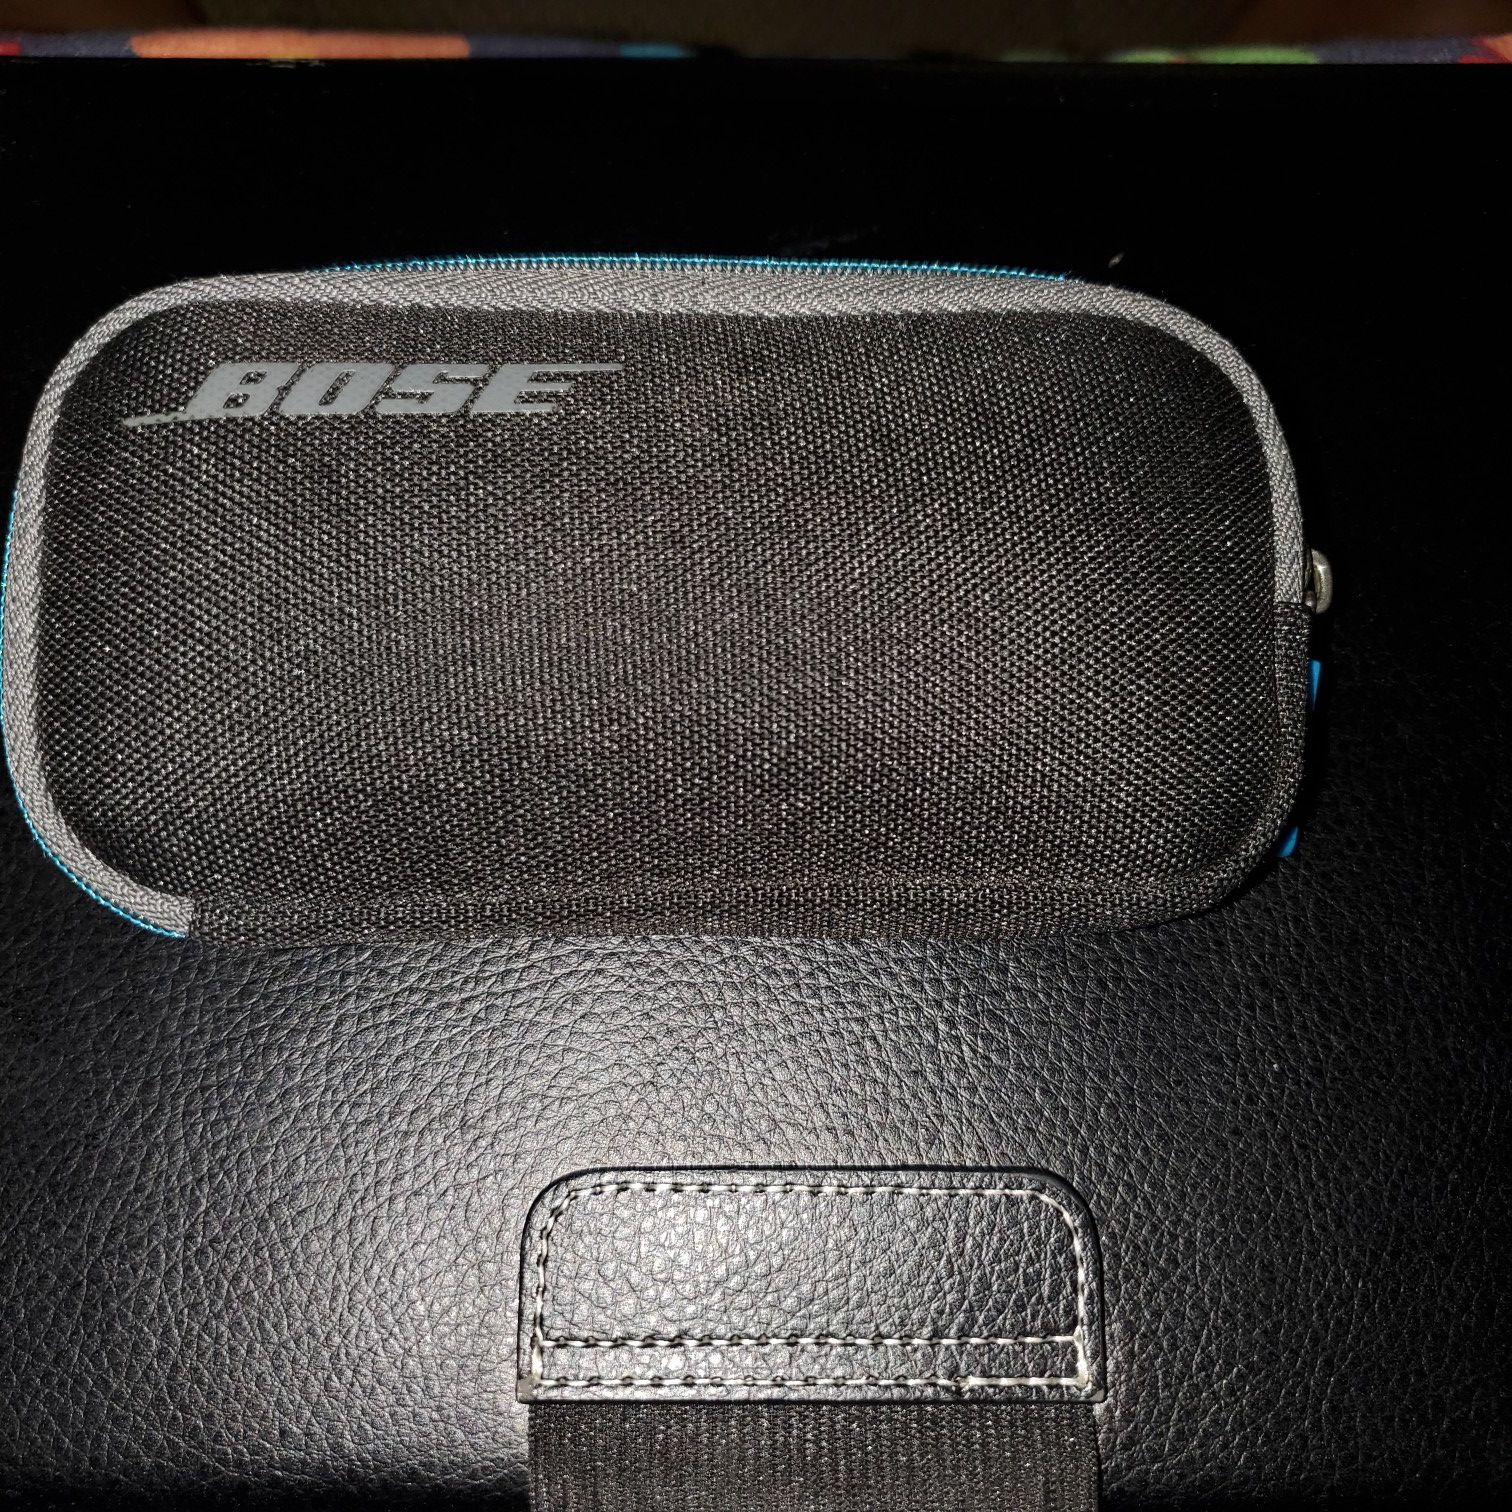 Bose artistic nose cancelling in ear headphones